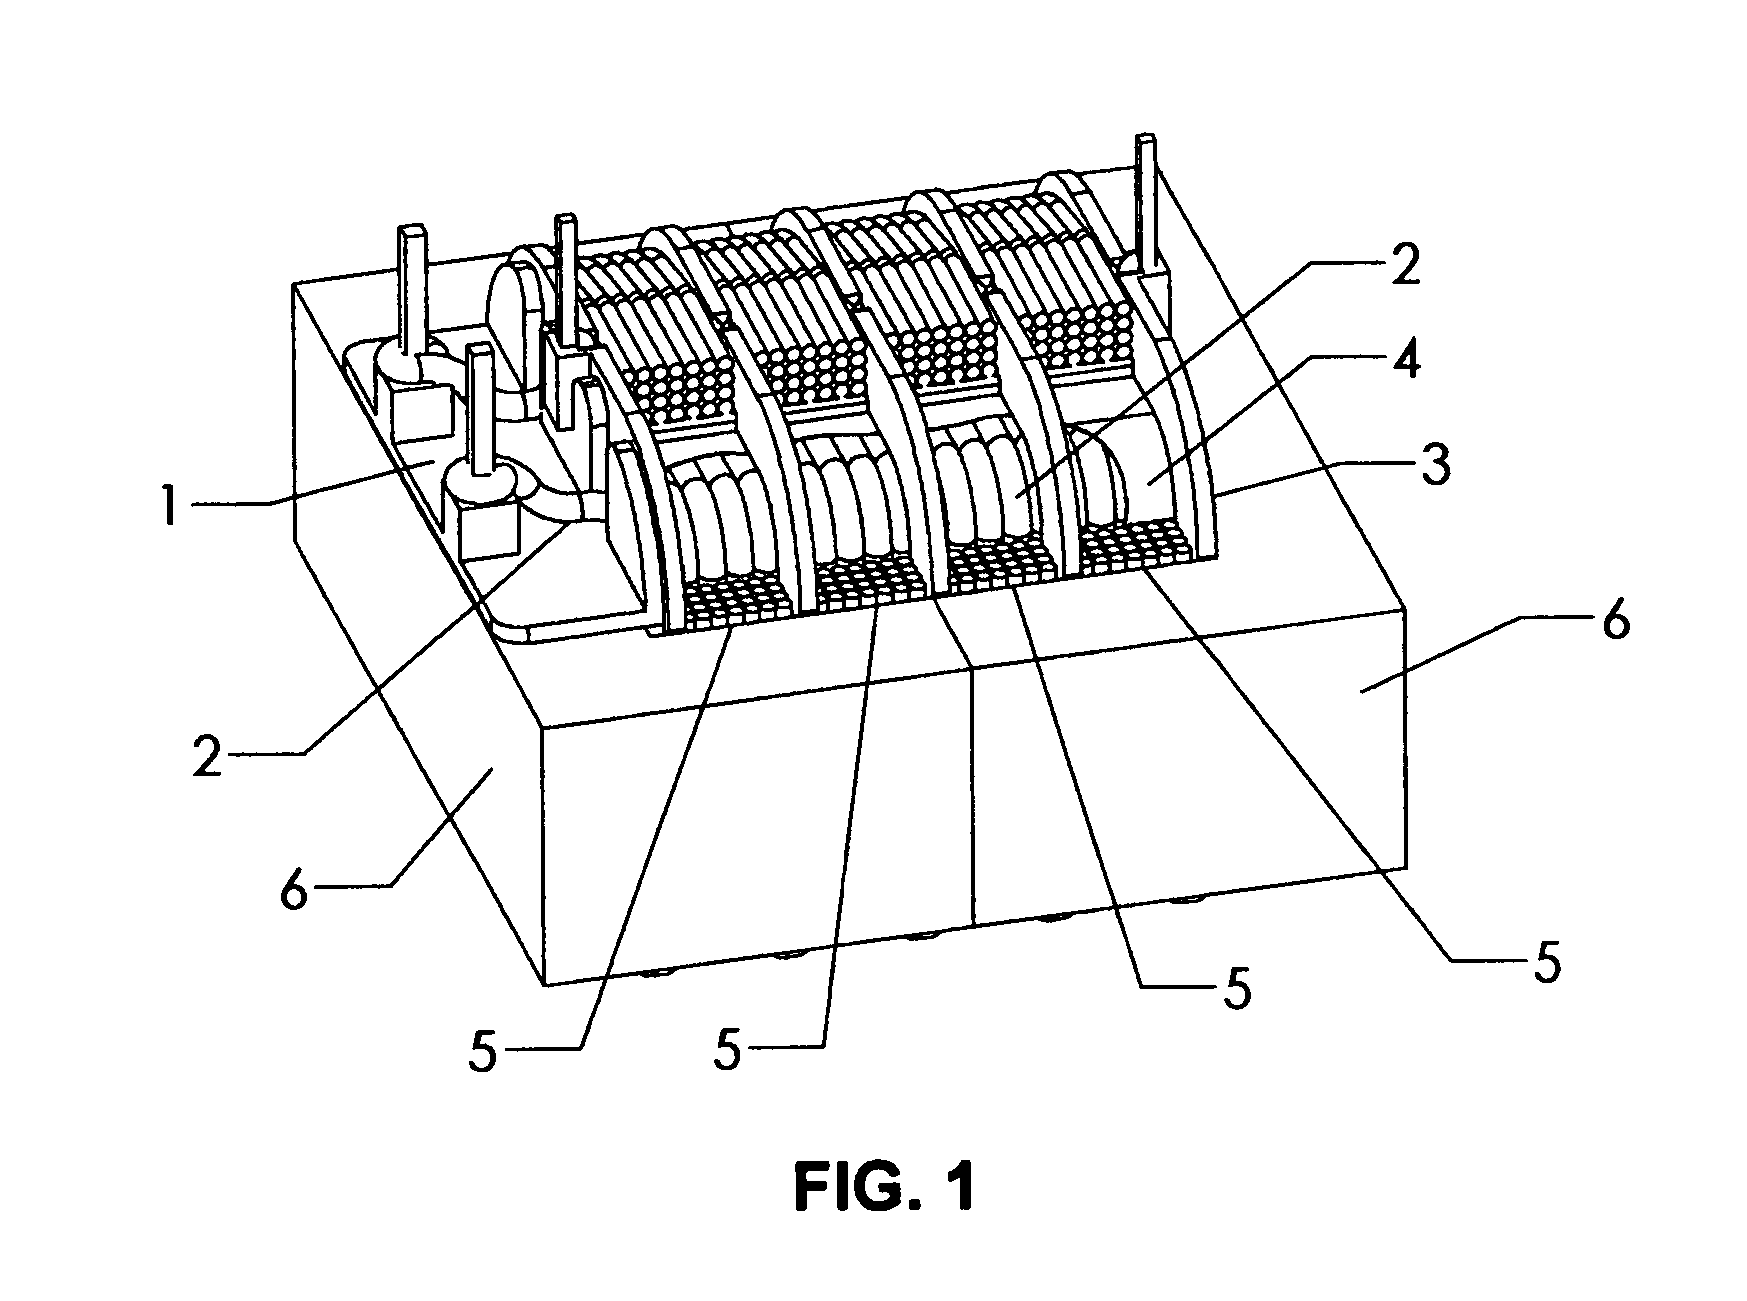 High voltage pulse type transformer with increased coupling coefficient through primary and secondary winding proximity